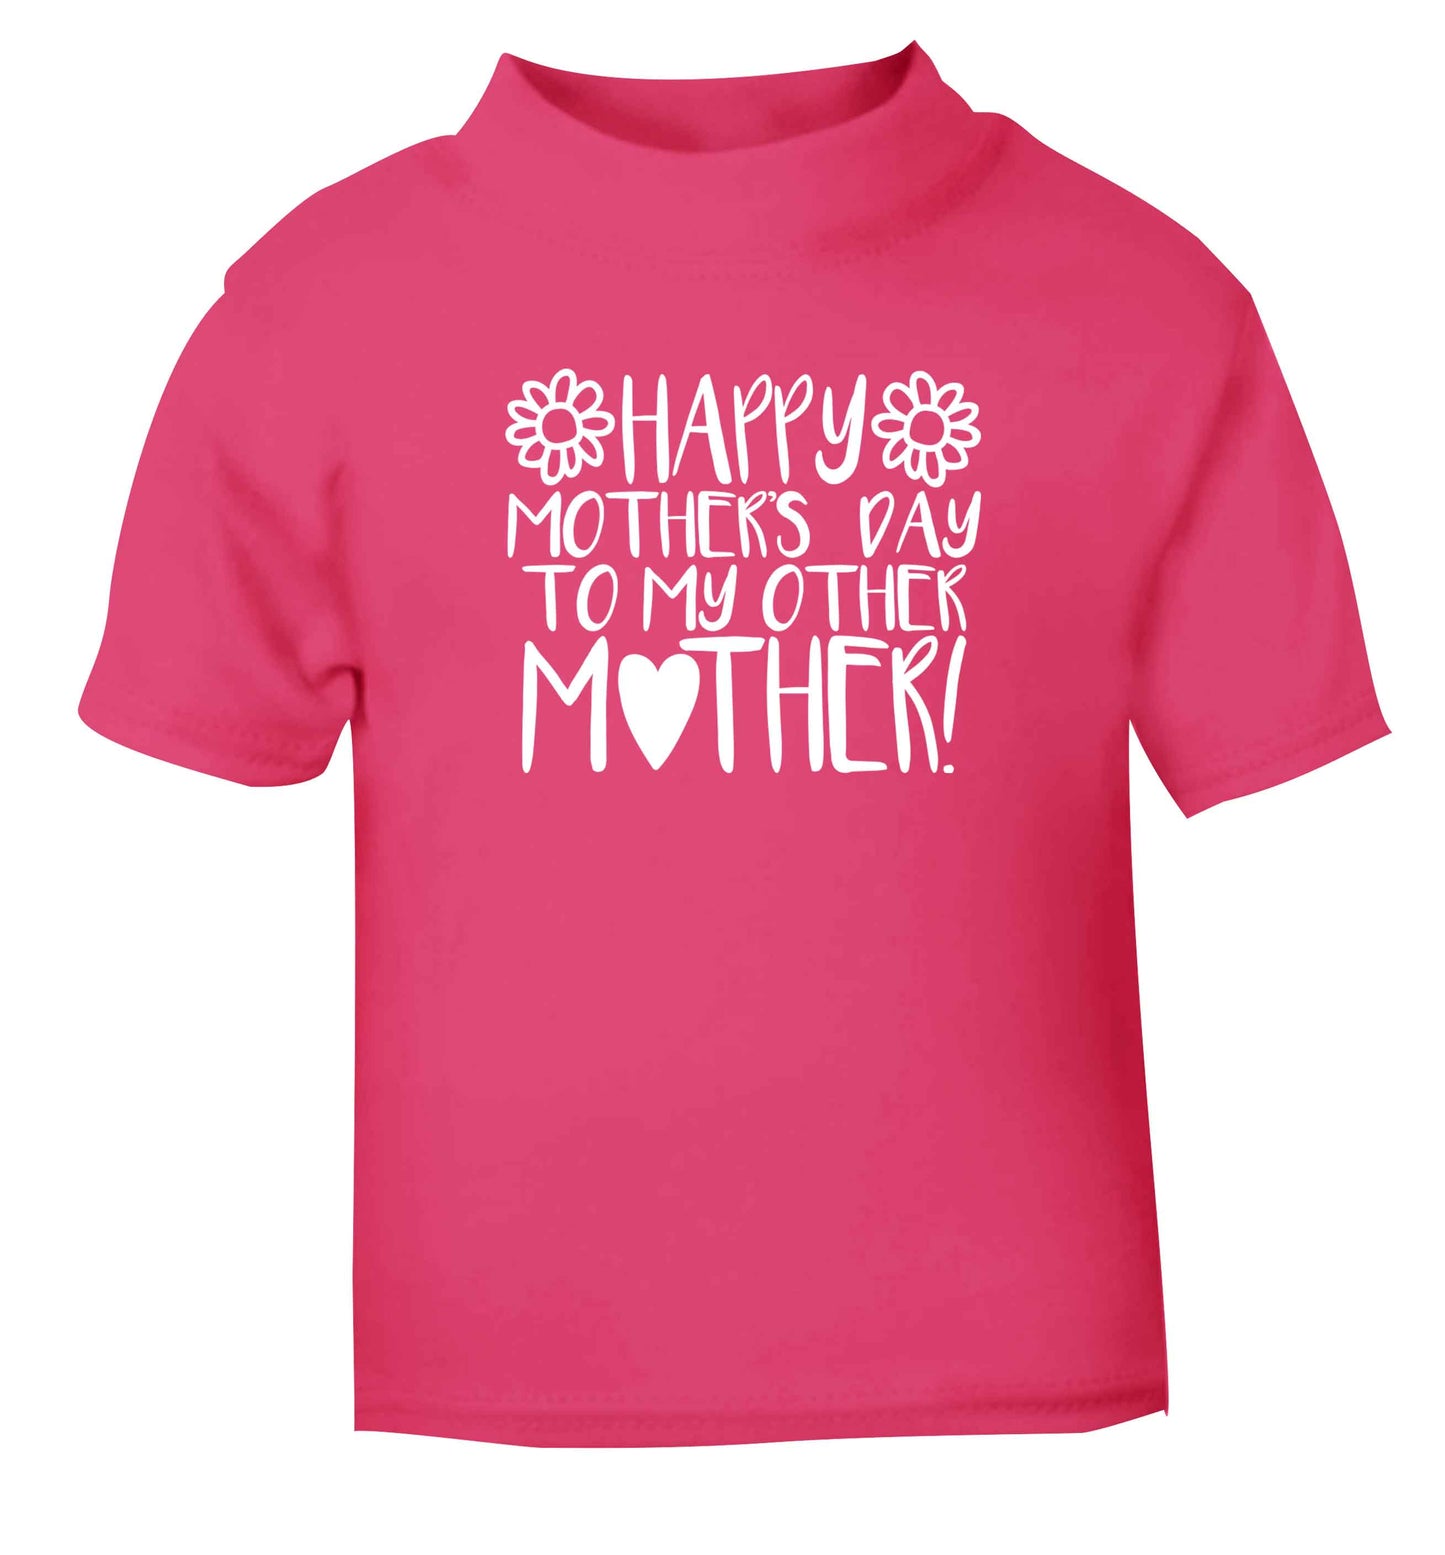 Happy mother's day to my other mother pink baby toddler Tshirt 2 Years